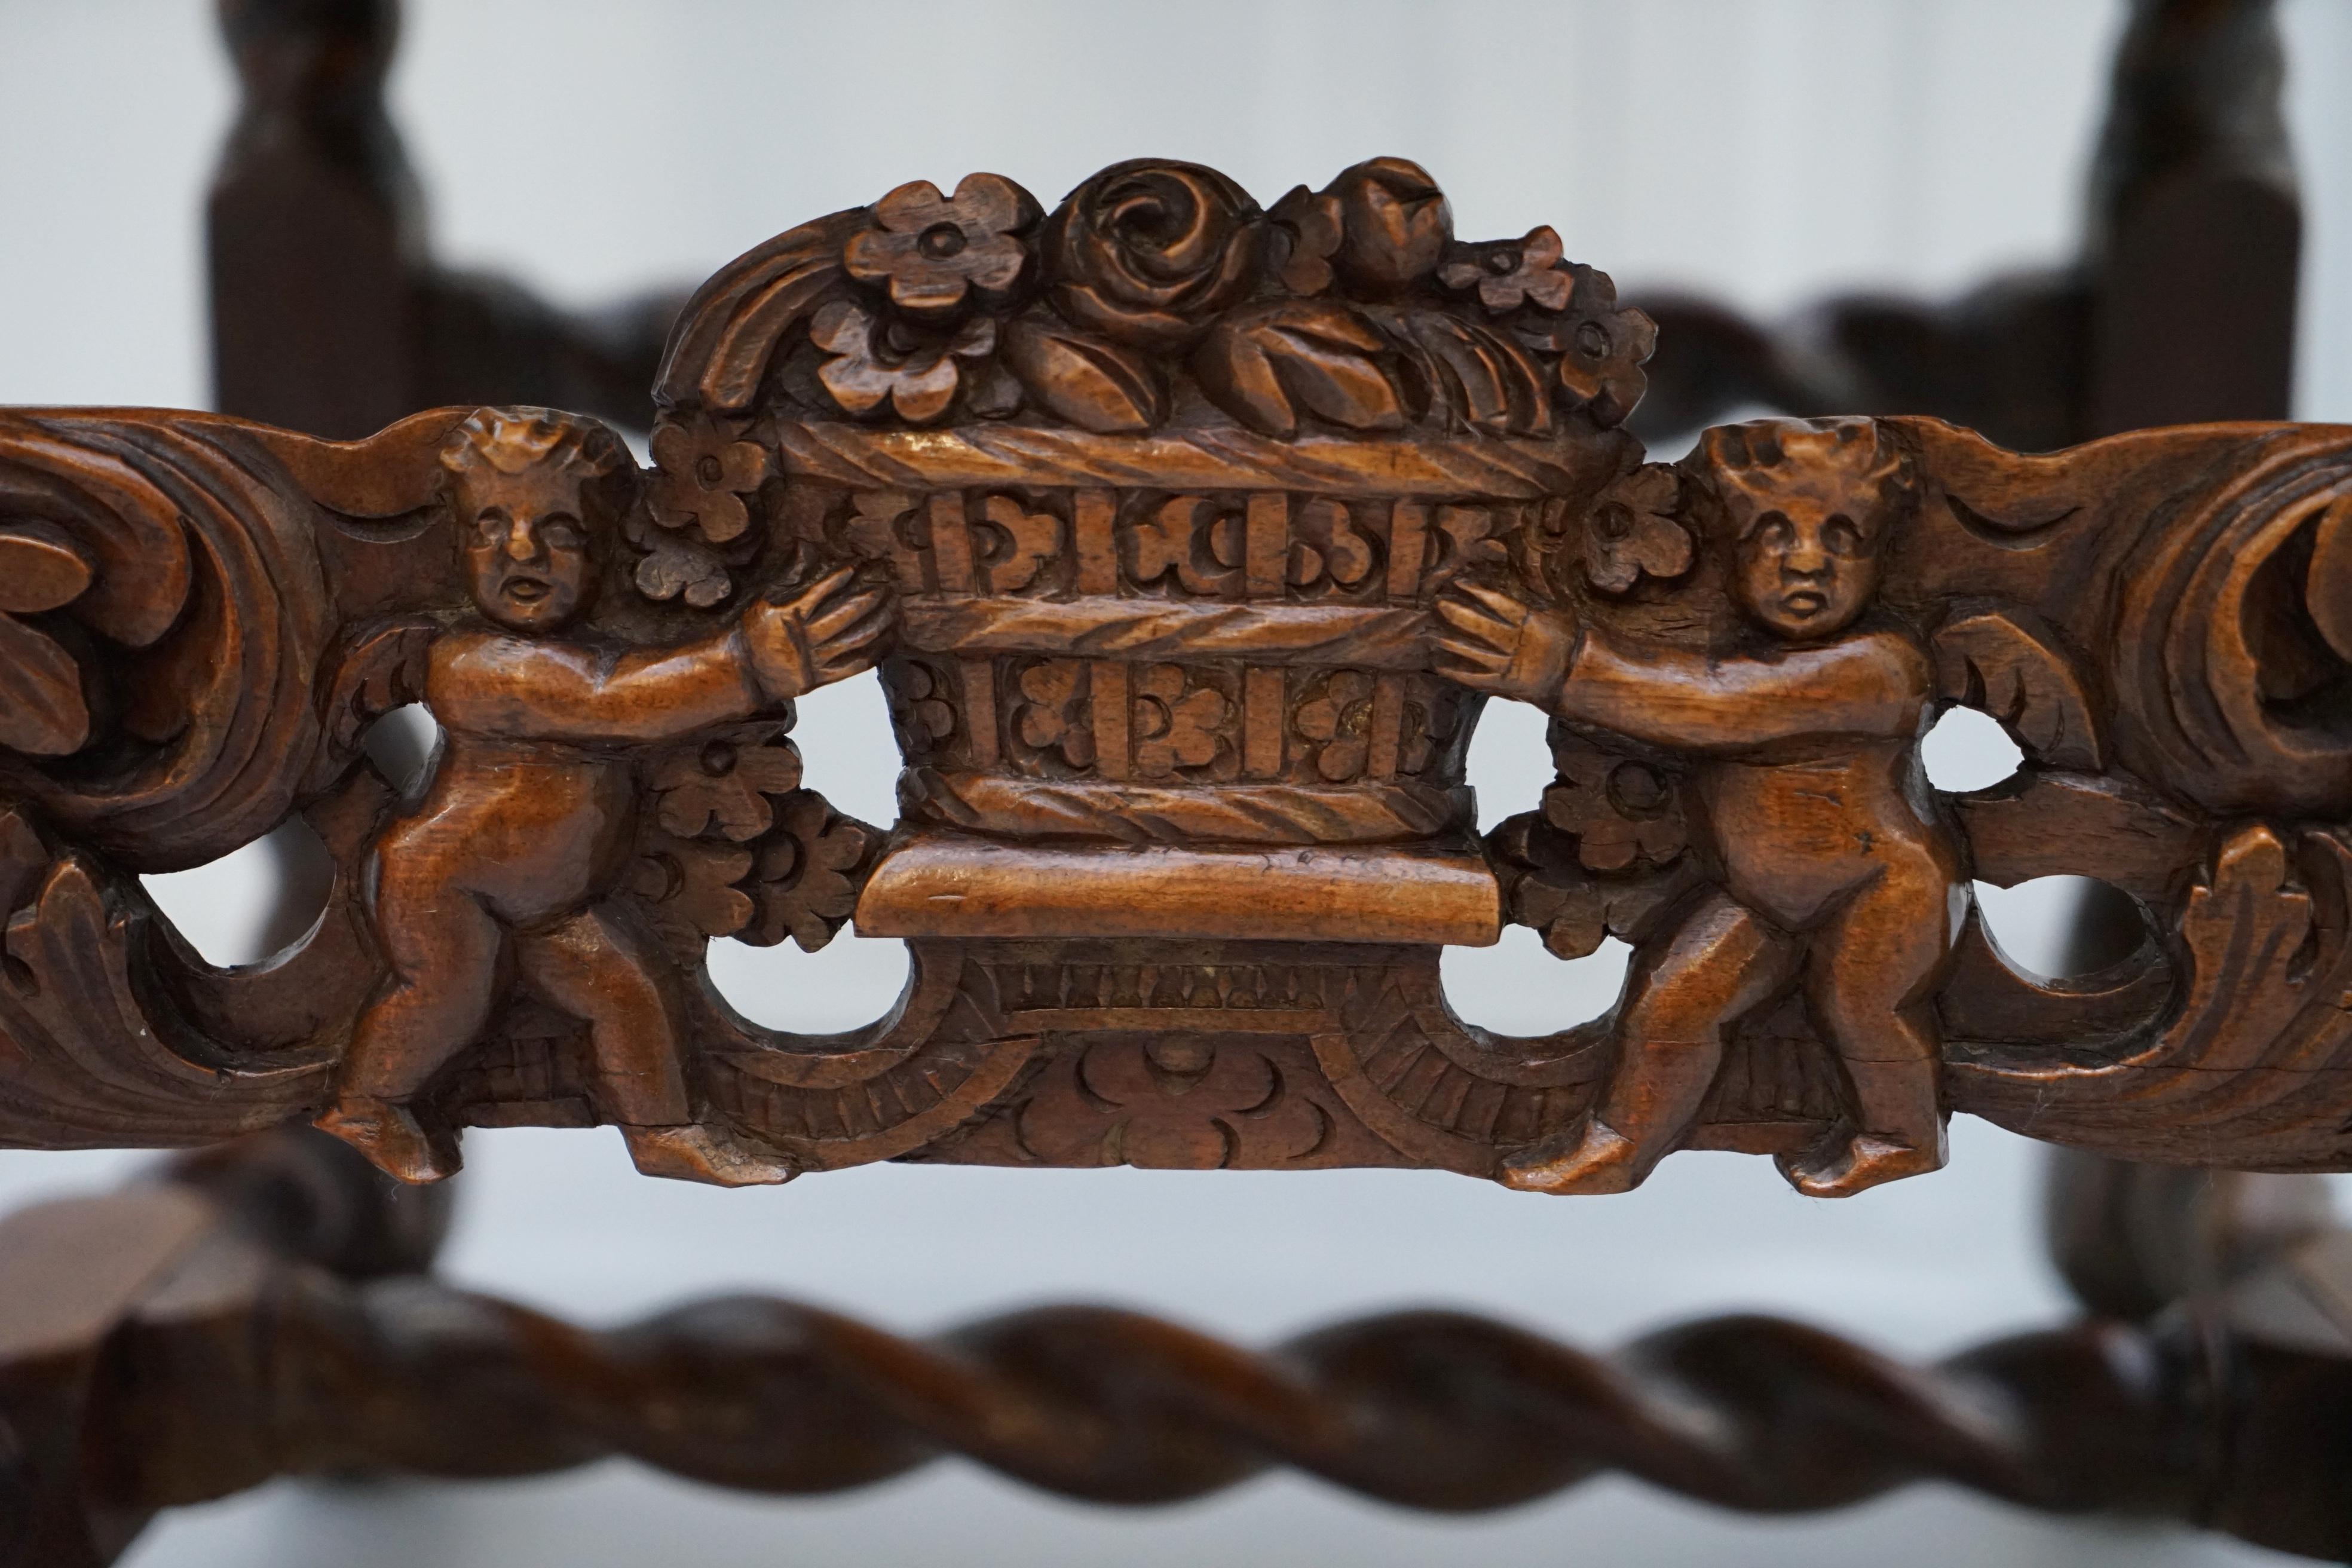 British Pair of 18th Century Fruit Wood Carved Chair Cherubs Holding a Crown and Flowers For Sale